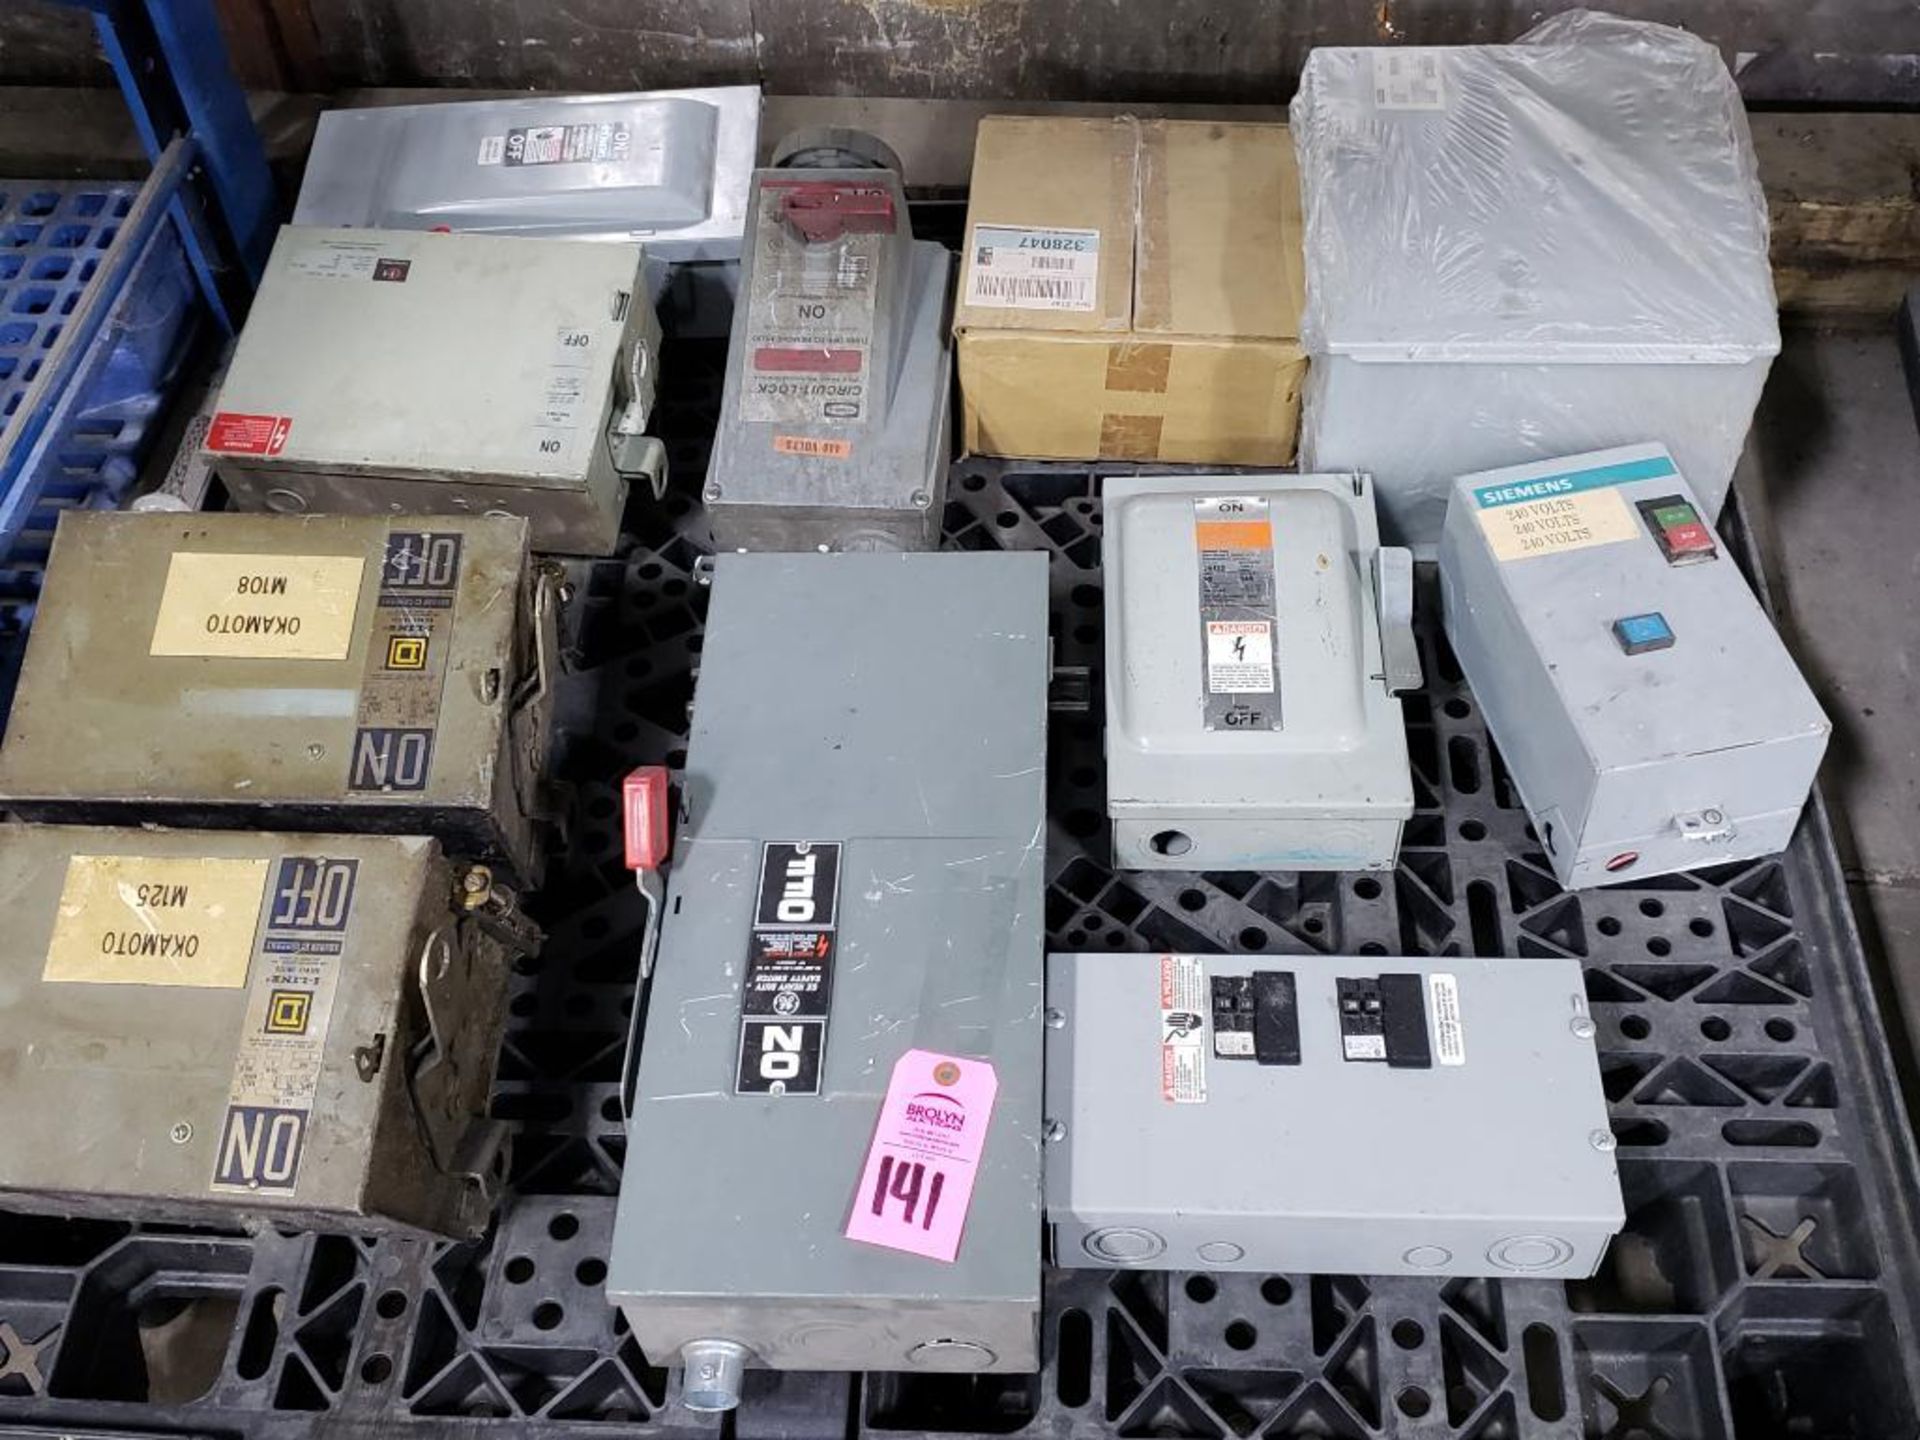 Qty 11 - Assorted disconnects, buss plugs and explosion proof plug on pallet.